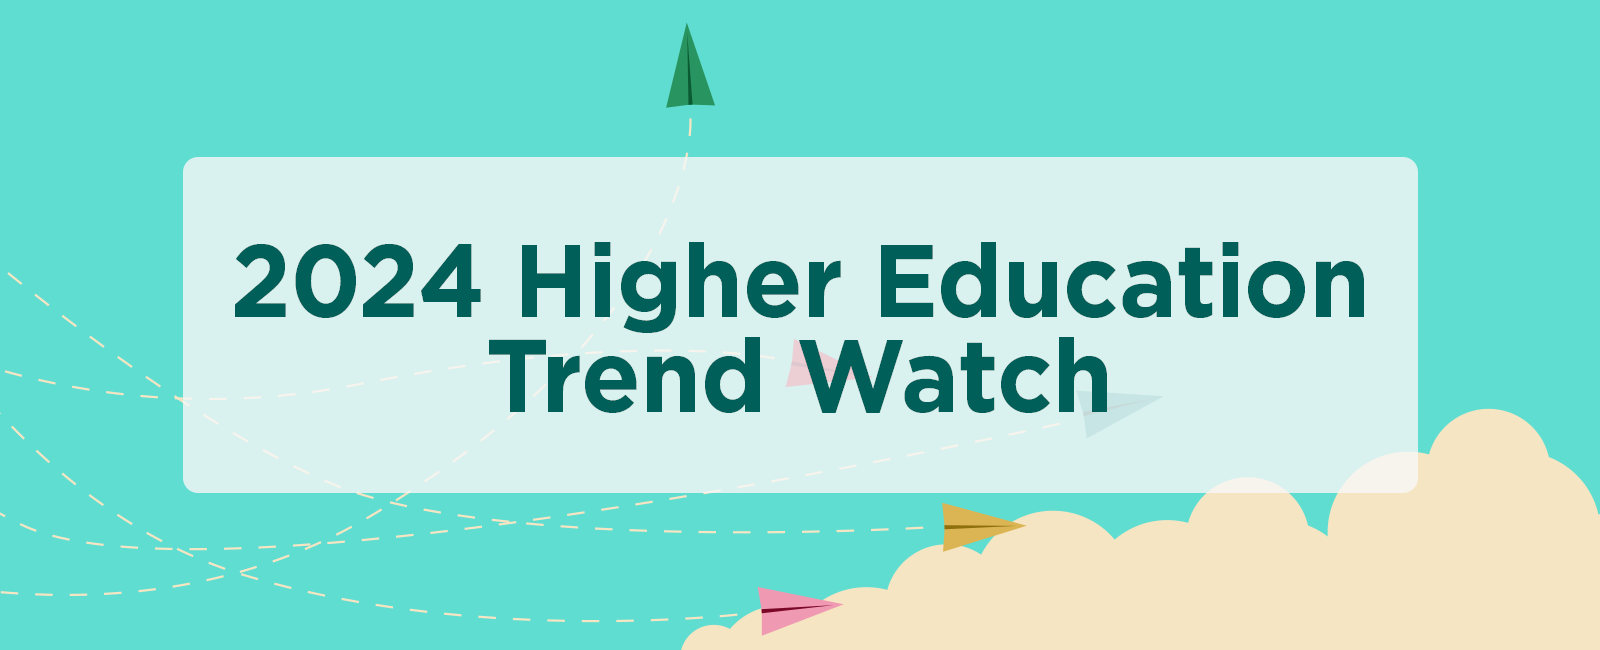 2024 Higher Education Trend Watch